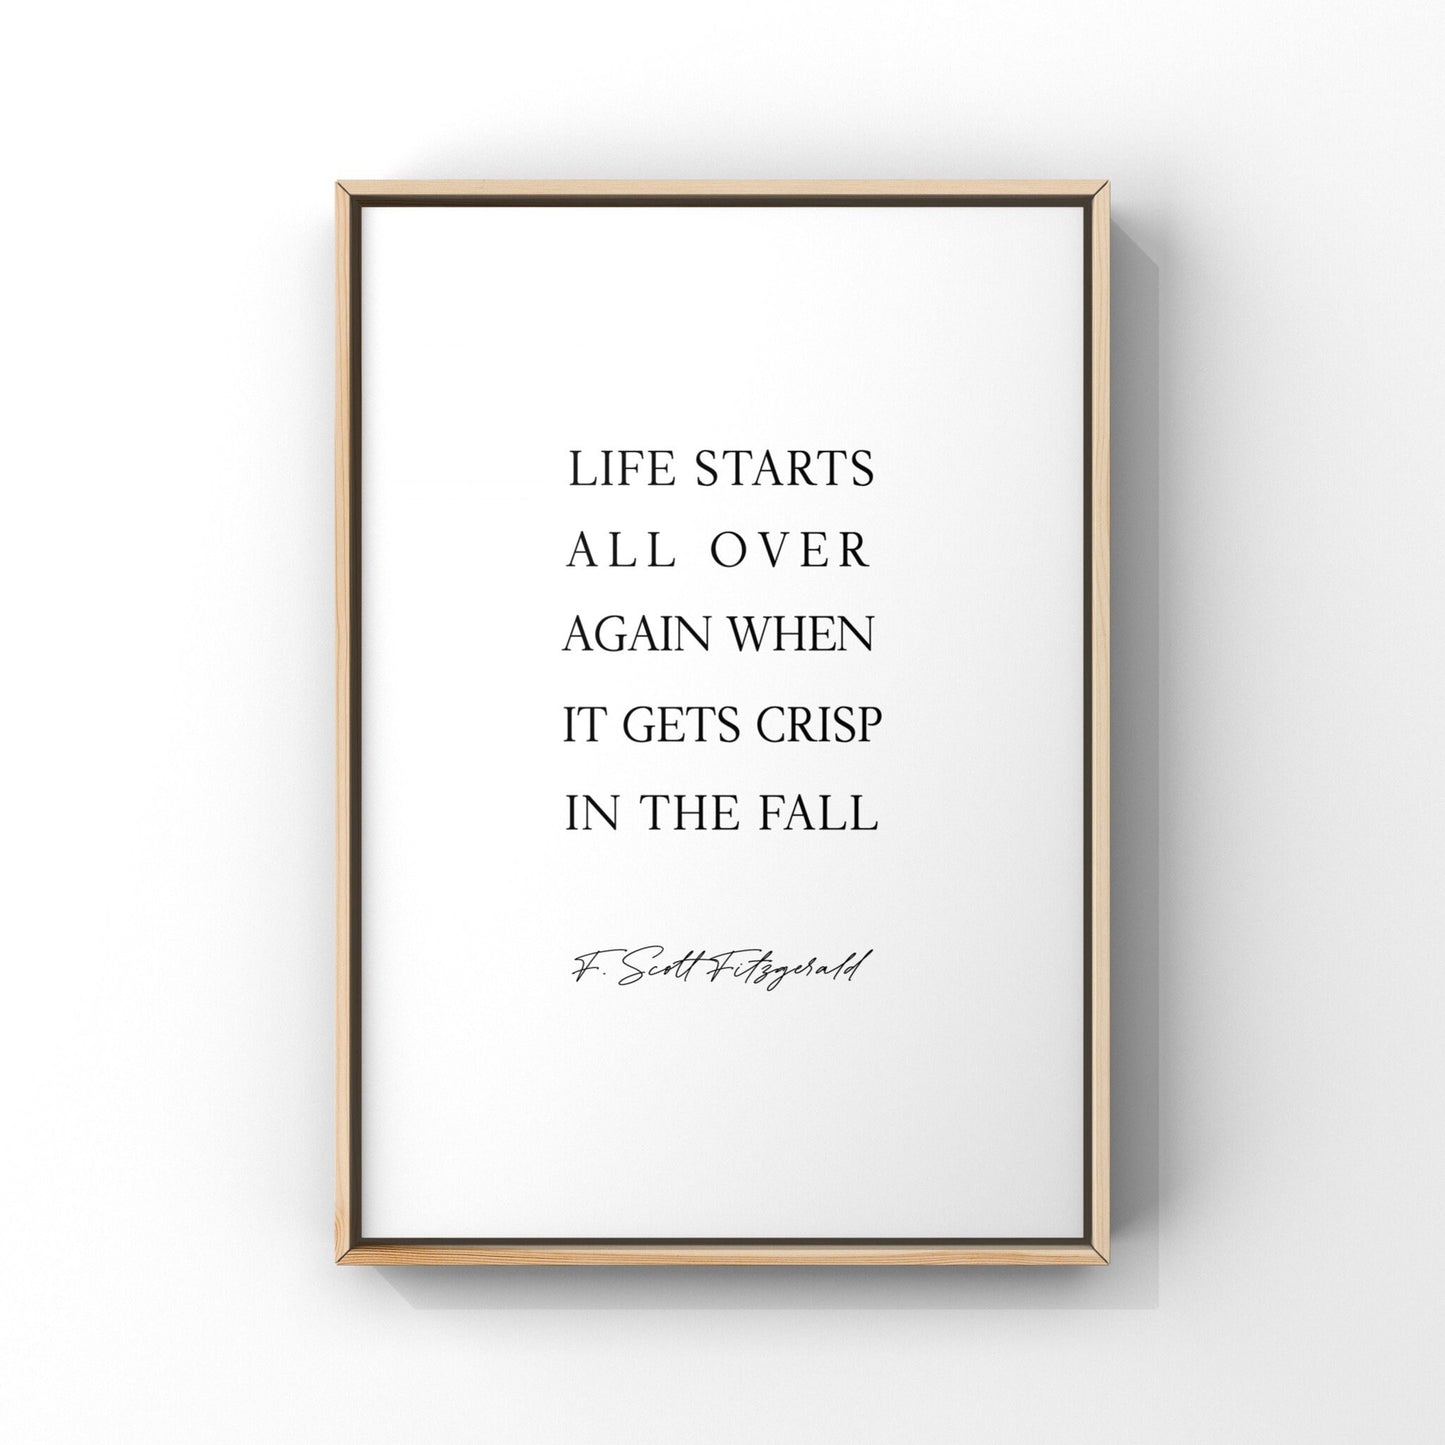 Life starts all over again when it gets crisp in the fall, F. Scott Fitzgerald quote art, Fall print, Fall Wall Art, Fall Home Decor